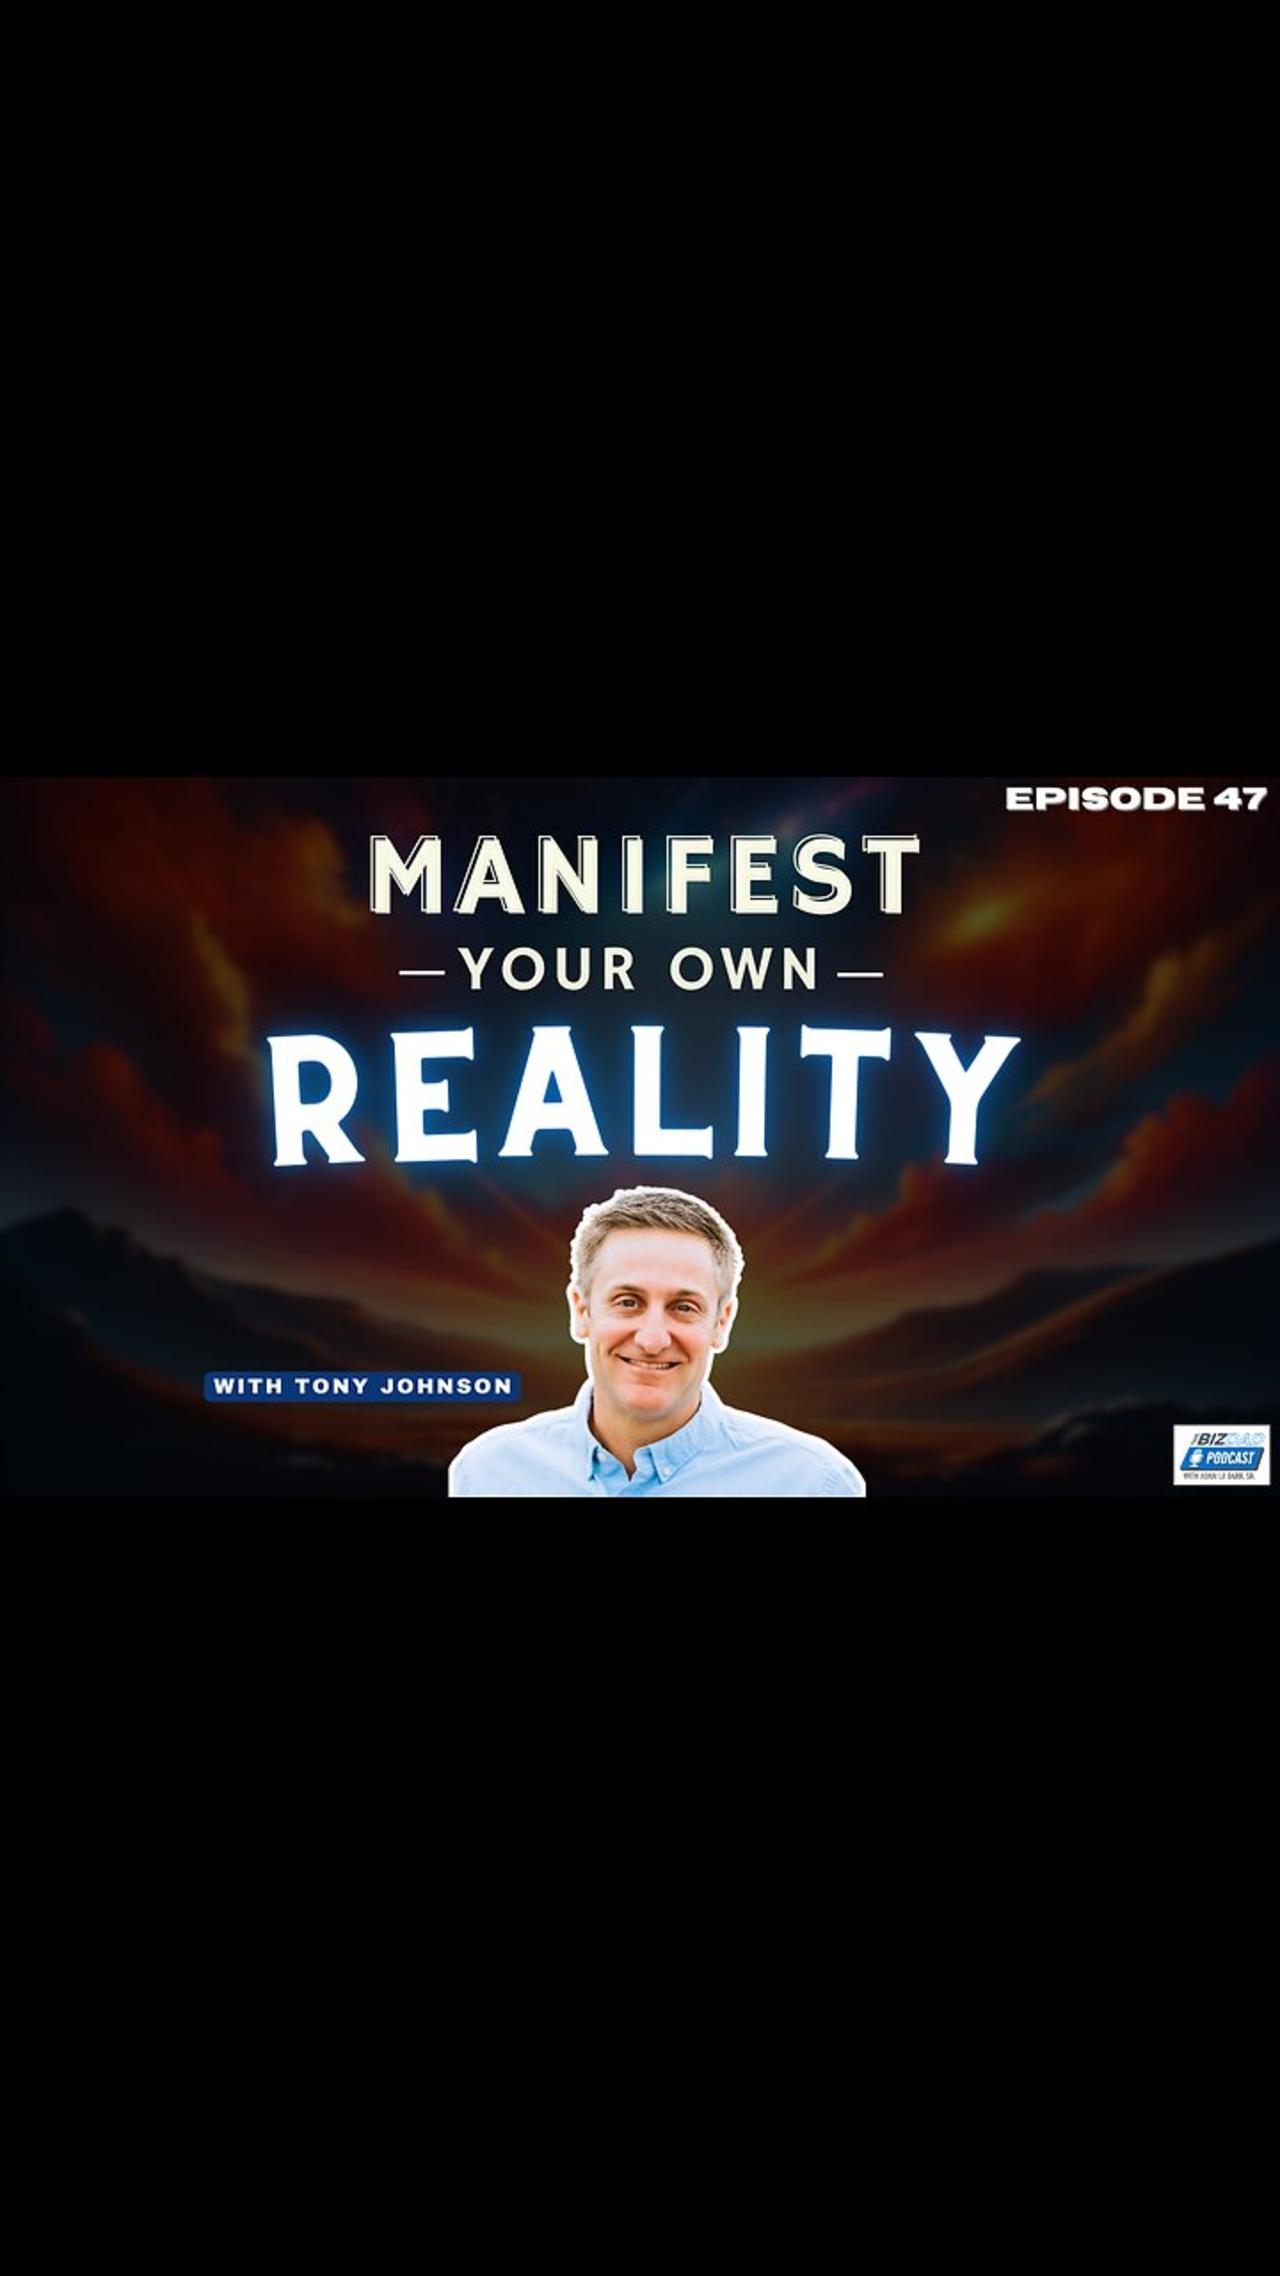 Reel #4 Episode 47: Manifest Your Own Reality with Tony Johnson